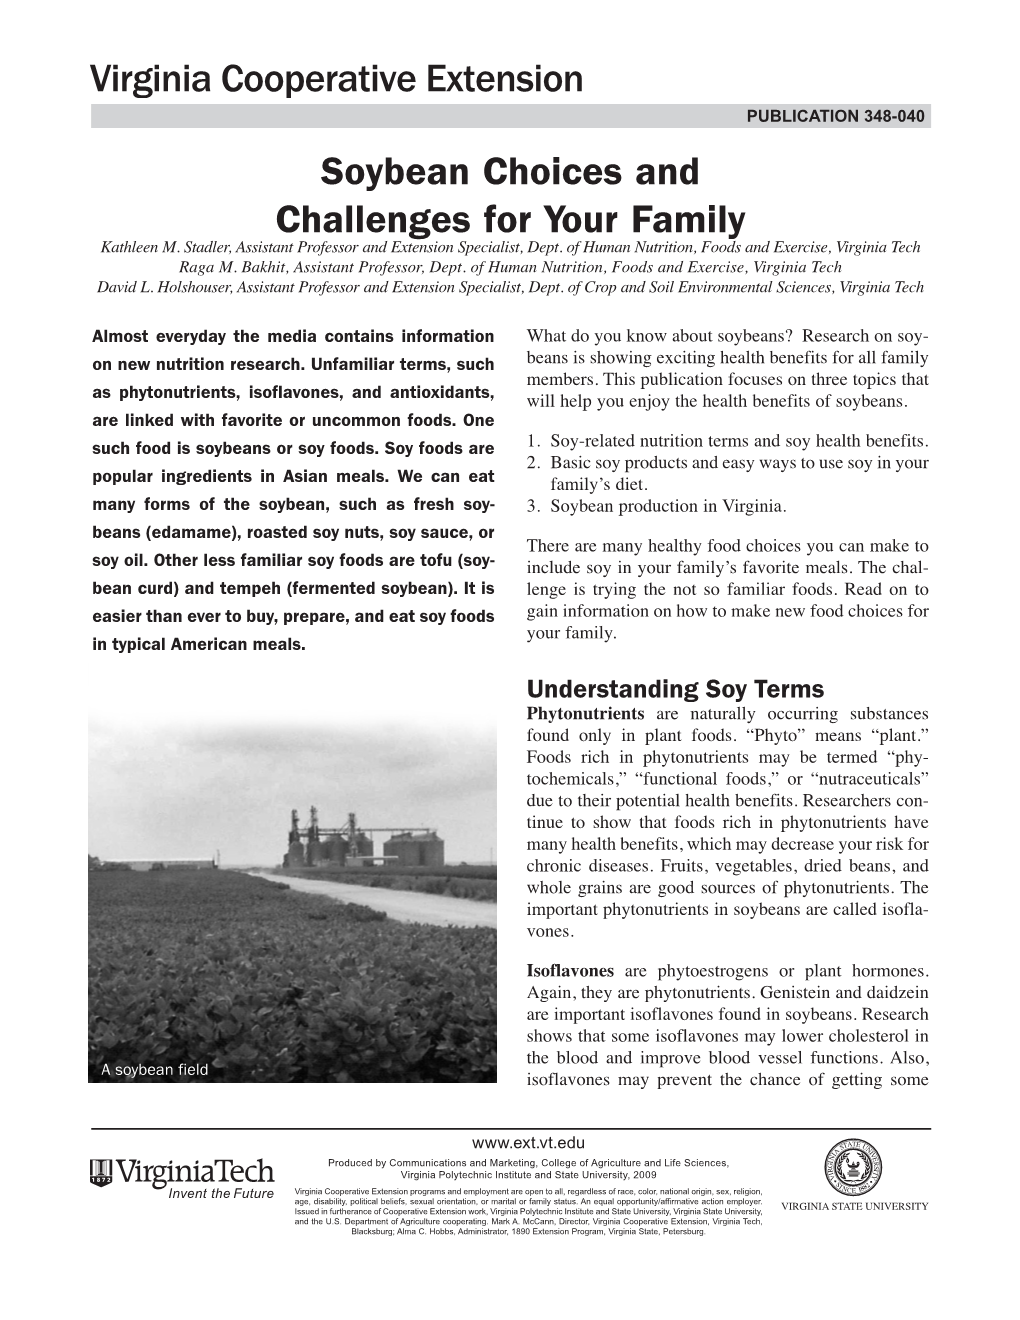 Soybean Choices and Challenges for Your Family